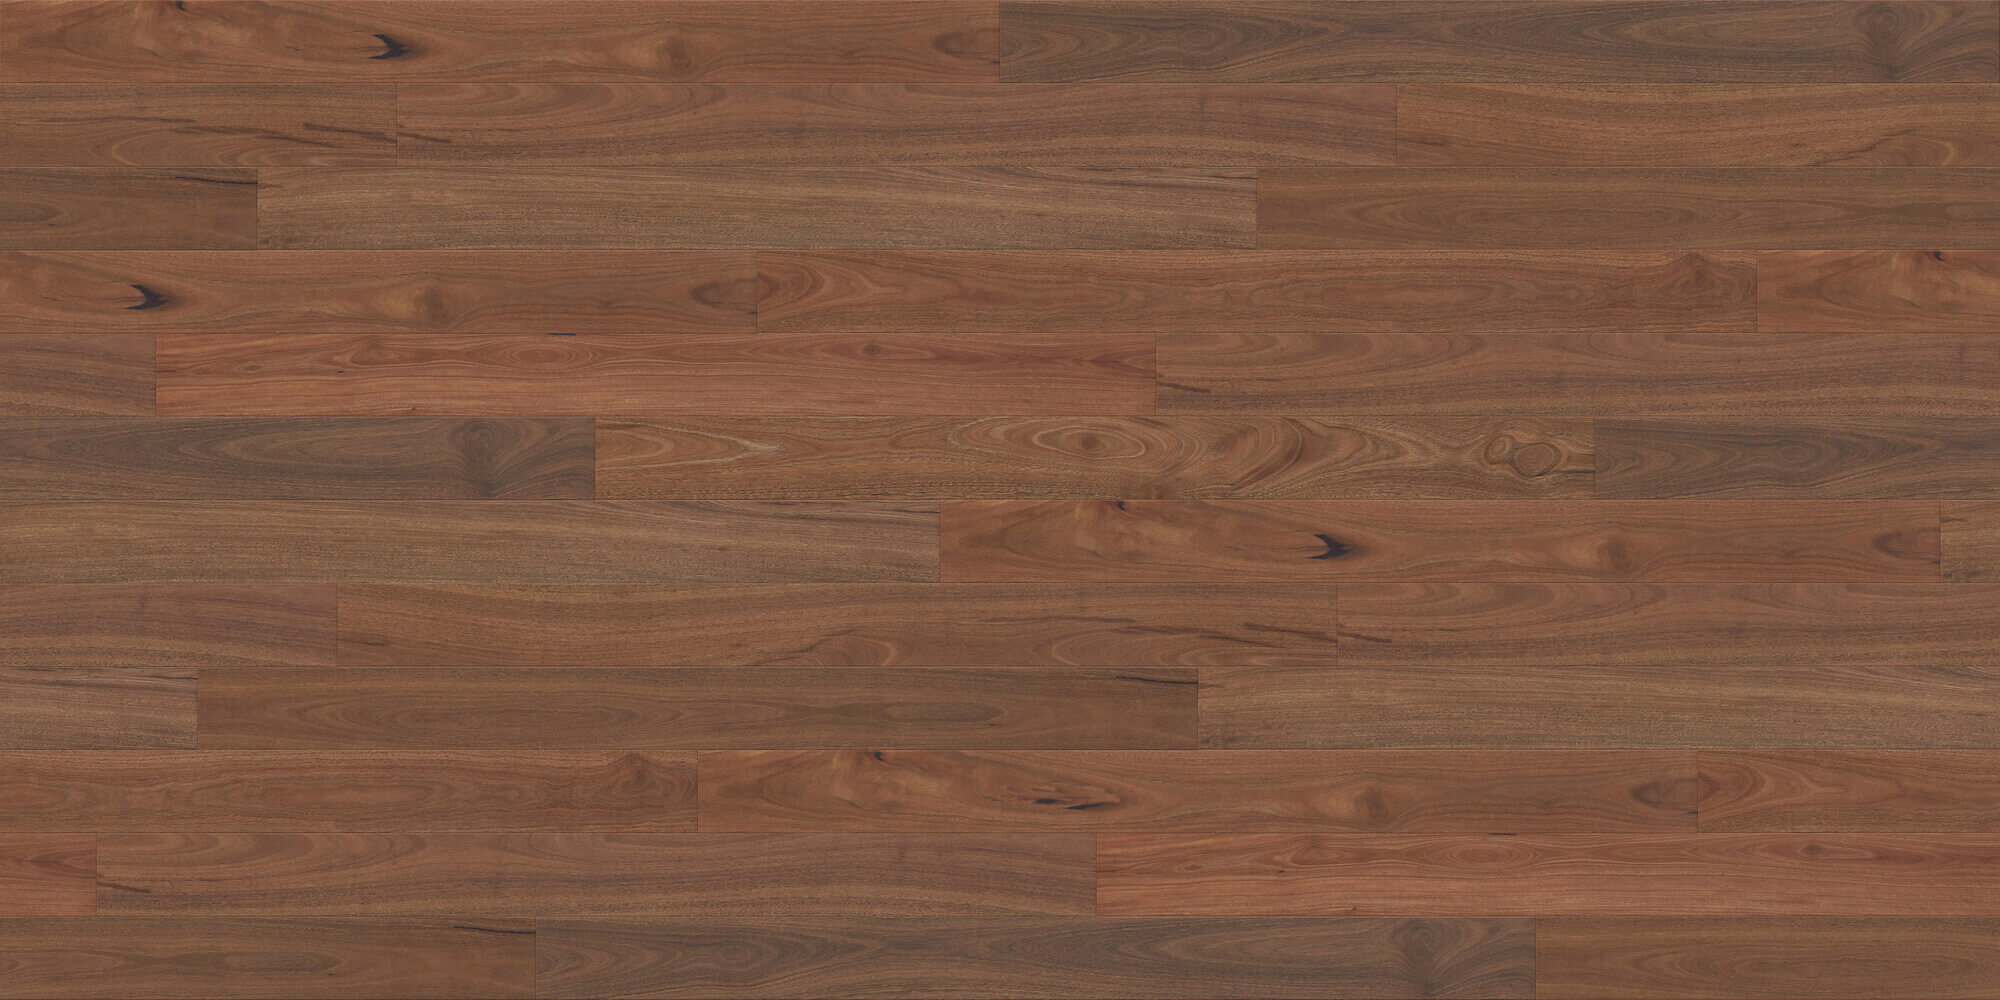 Empire OZ Engineered Timber Spotted Gum - Online Flooring Store